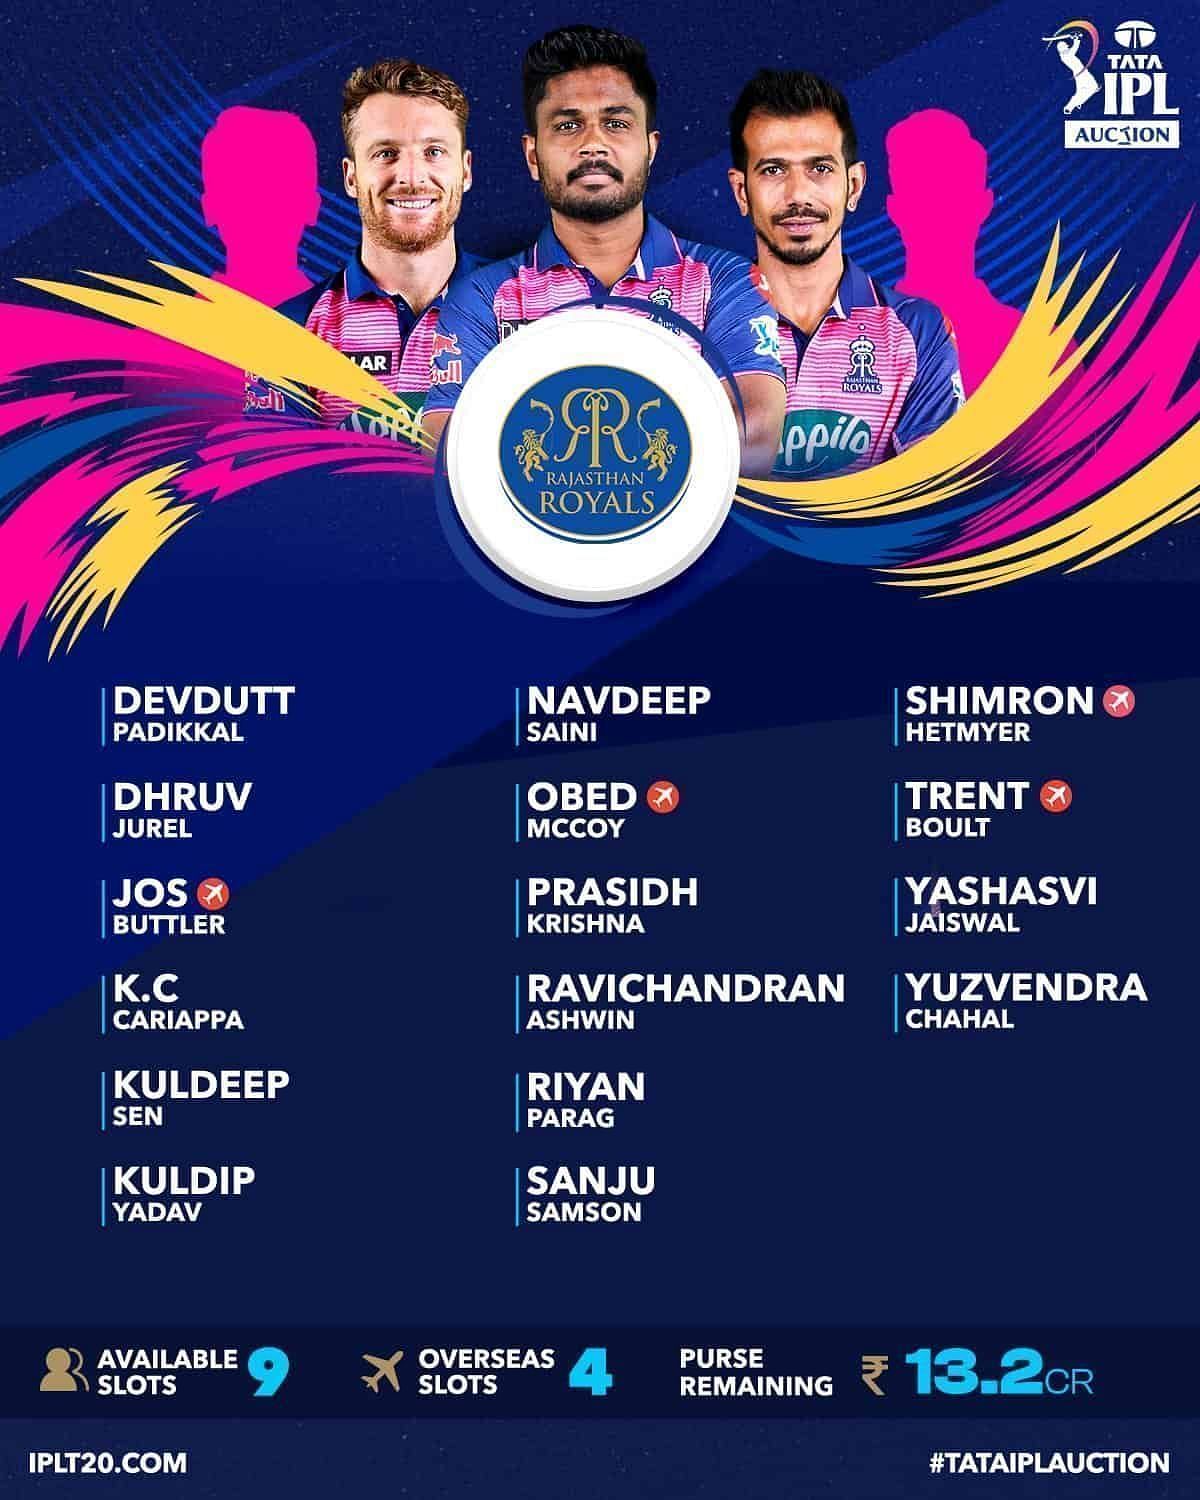 IPL-2023-Auction-&lt;span class=&#039;entity-link&#039; id=&#039;suggestBtn-69&#039;&gt;RR&lt;/span&gt;-Squads-Purse-Remaining-Available-Slots-of-&lt;span class=&#039;entity-link&#039; id=&#039;suggestBtn-50&#039;&gt;Rajasthan&lt;/span&gt;-&lt;span class=&#039;entity-link&#039; id=&#039;suggestBtn-14&#039;&gt;Royals&lt;/span&gt;.jpg (1200&times;1500)